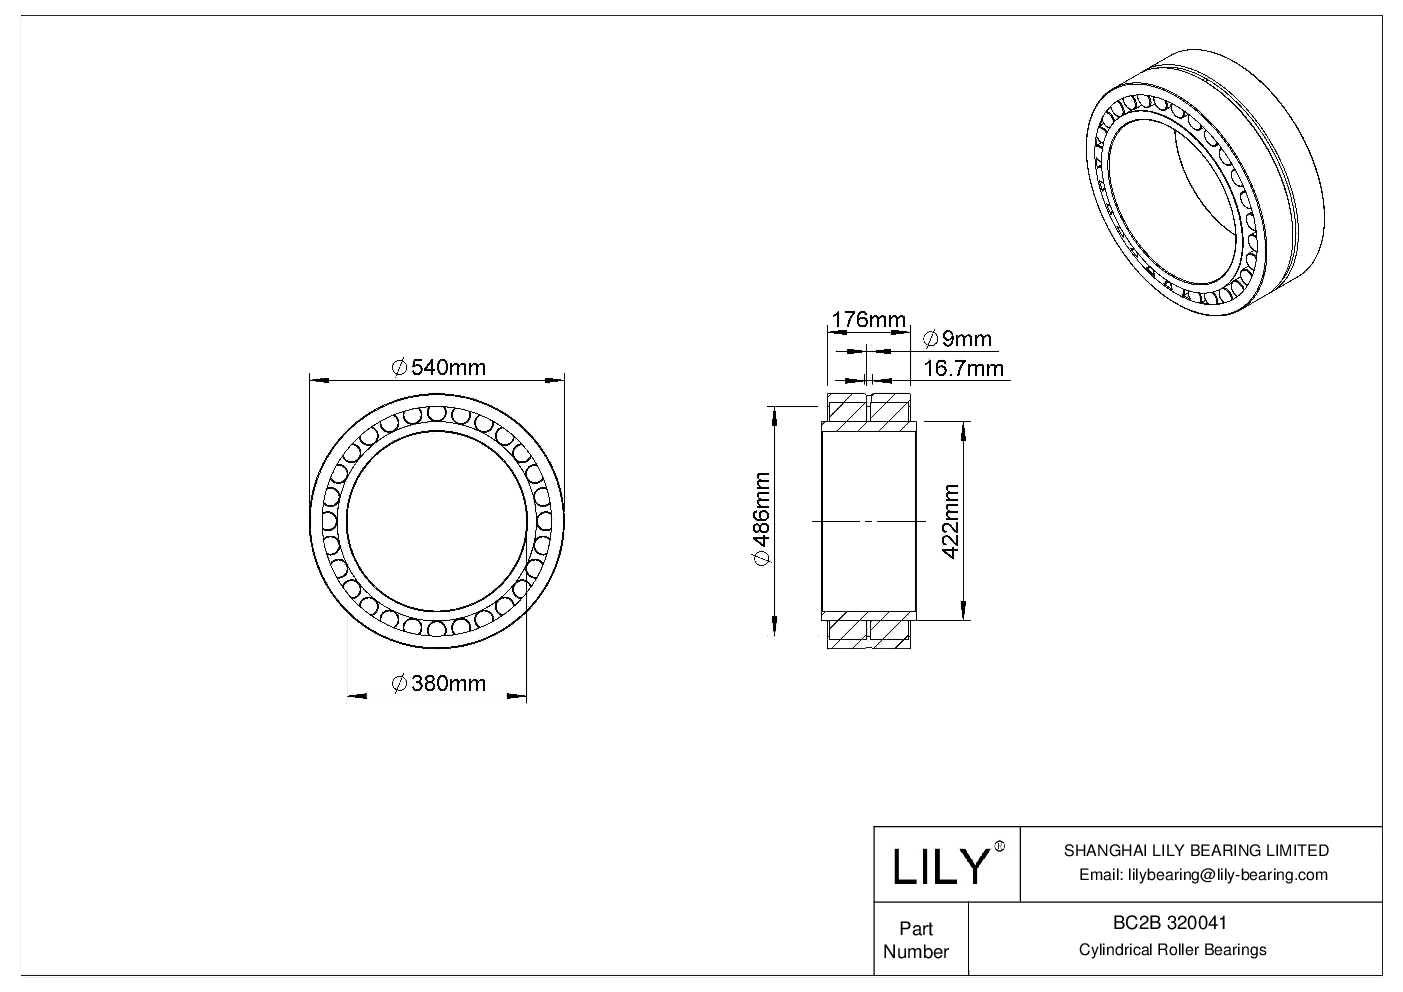 BC2B 320041 Double Row Cylindrical Roller Bearings cad drawing